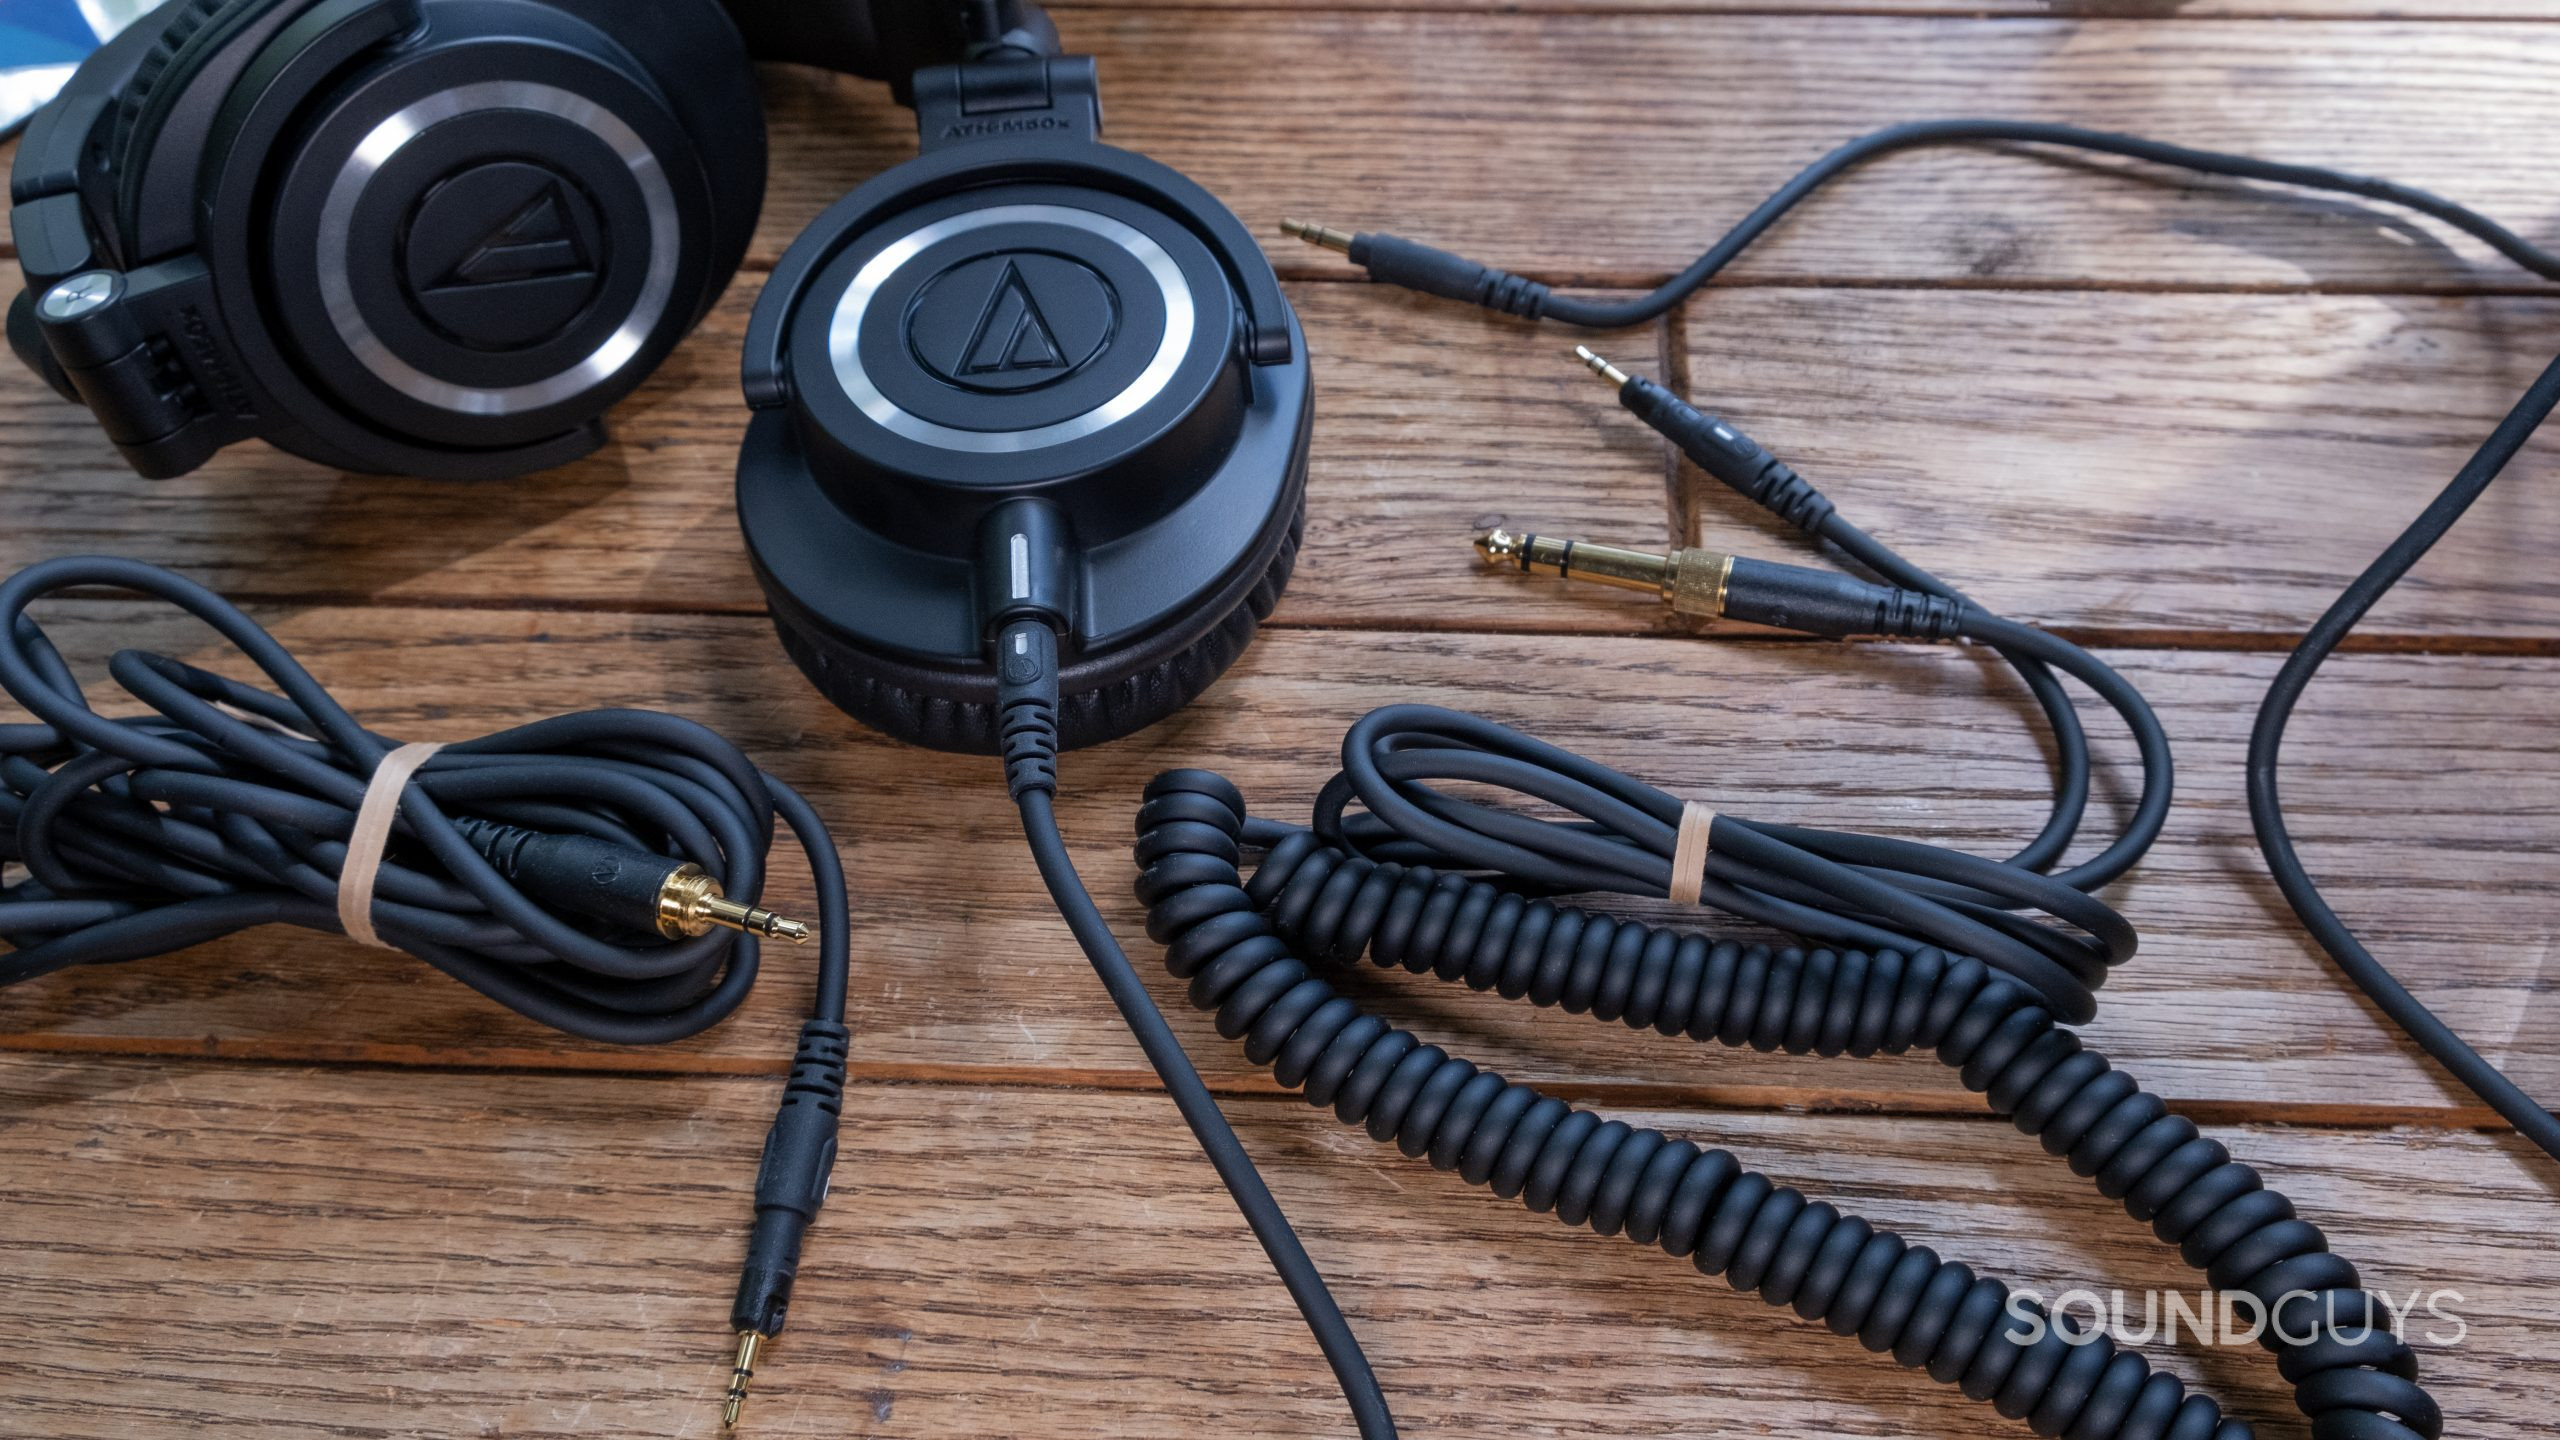 The Audio-Technica ATH-M50x lays partially folded on a wood surface surrounded by all three included cables.